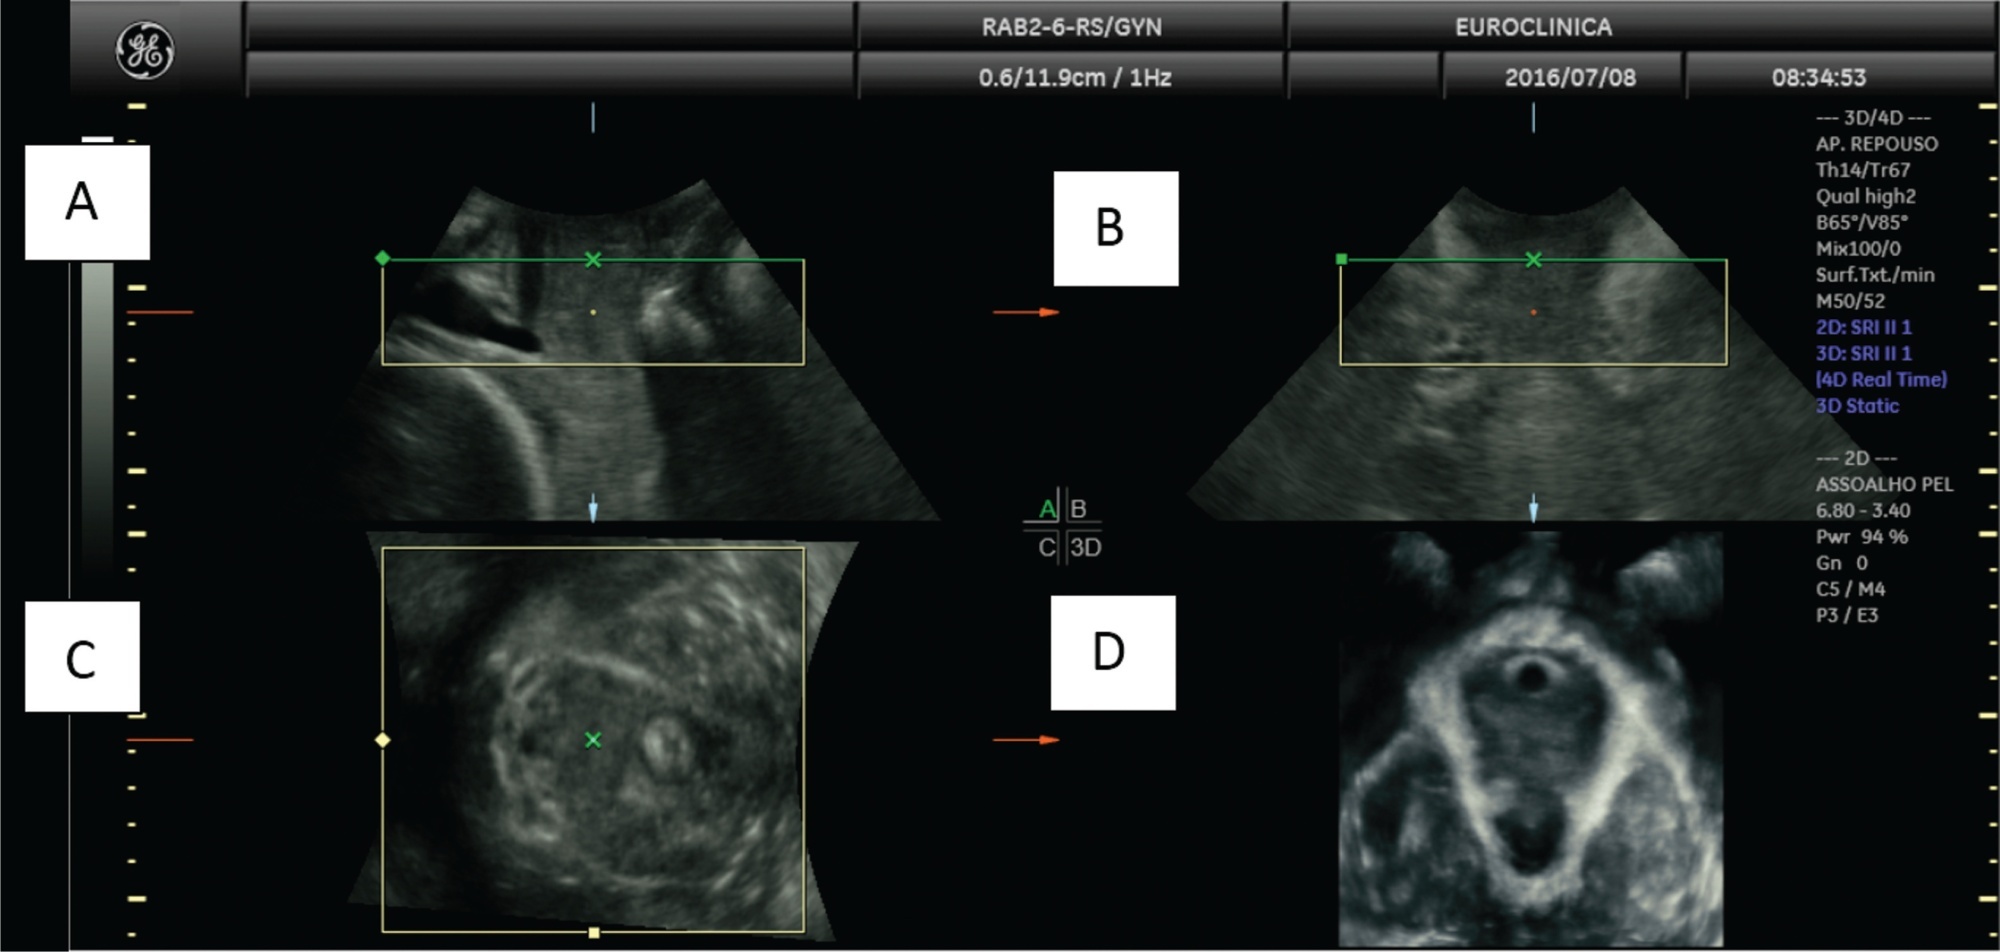 Assessment of Pelvic Floor Disorders due to the Gestational Diabetes Mellitus Using Three-Dimensional Ultrasonography: A Narrative Review